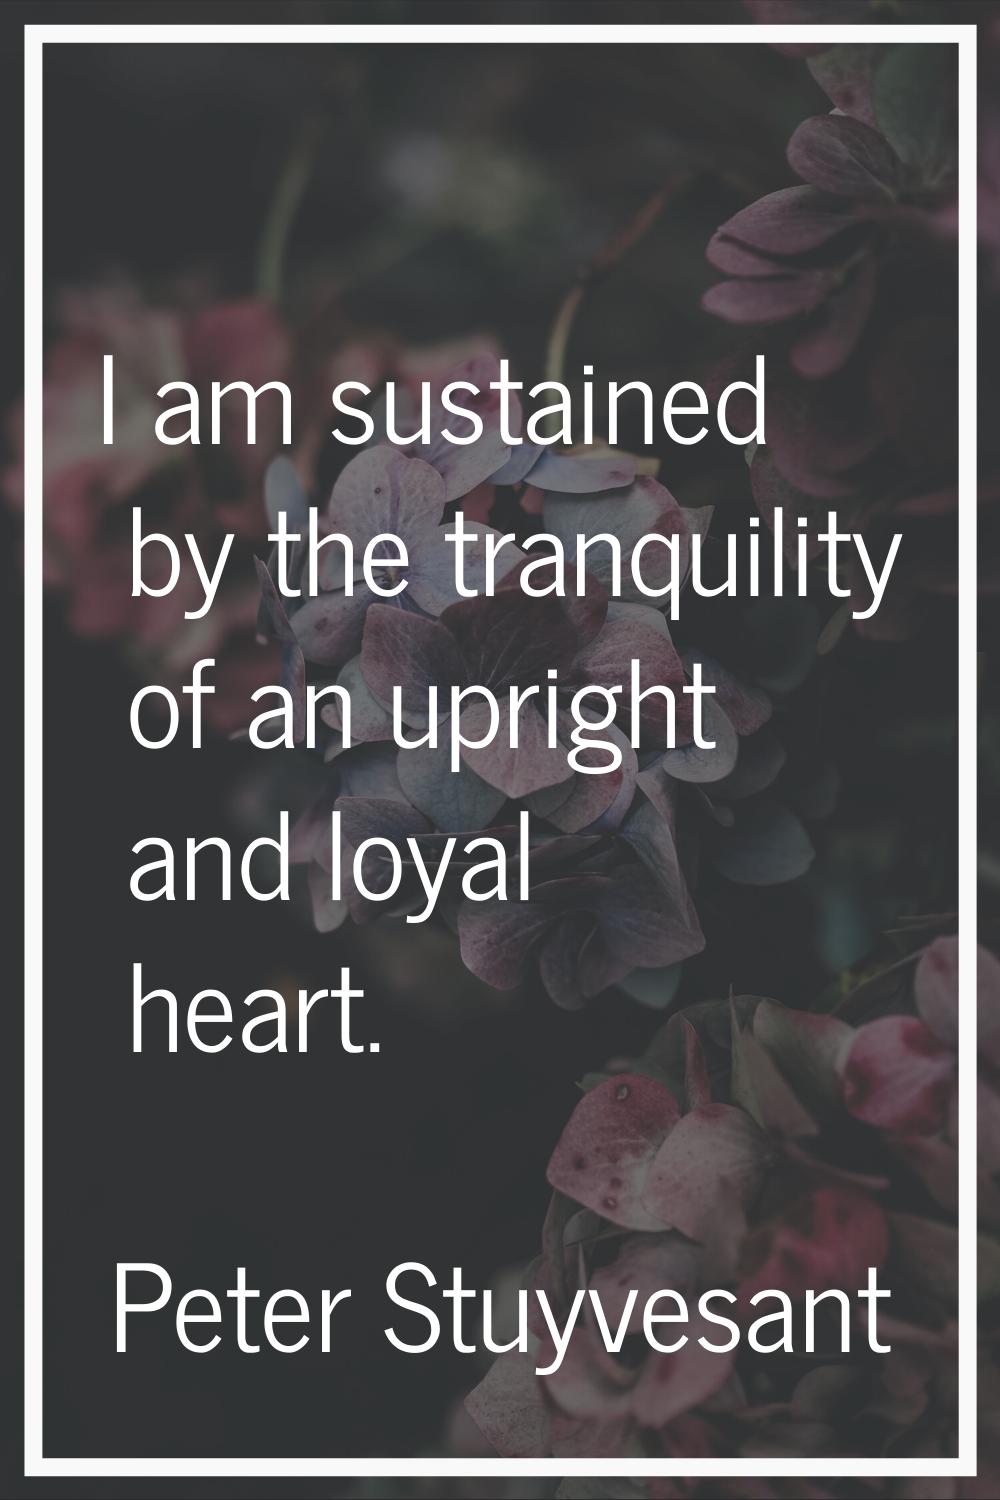 I am sustained by the tranquility of an upright and loyal heart.